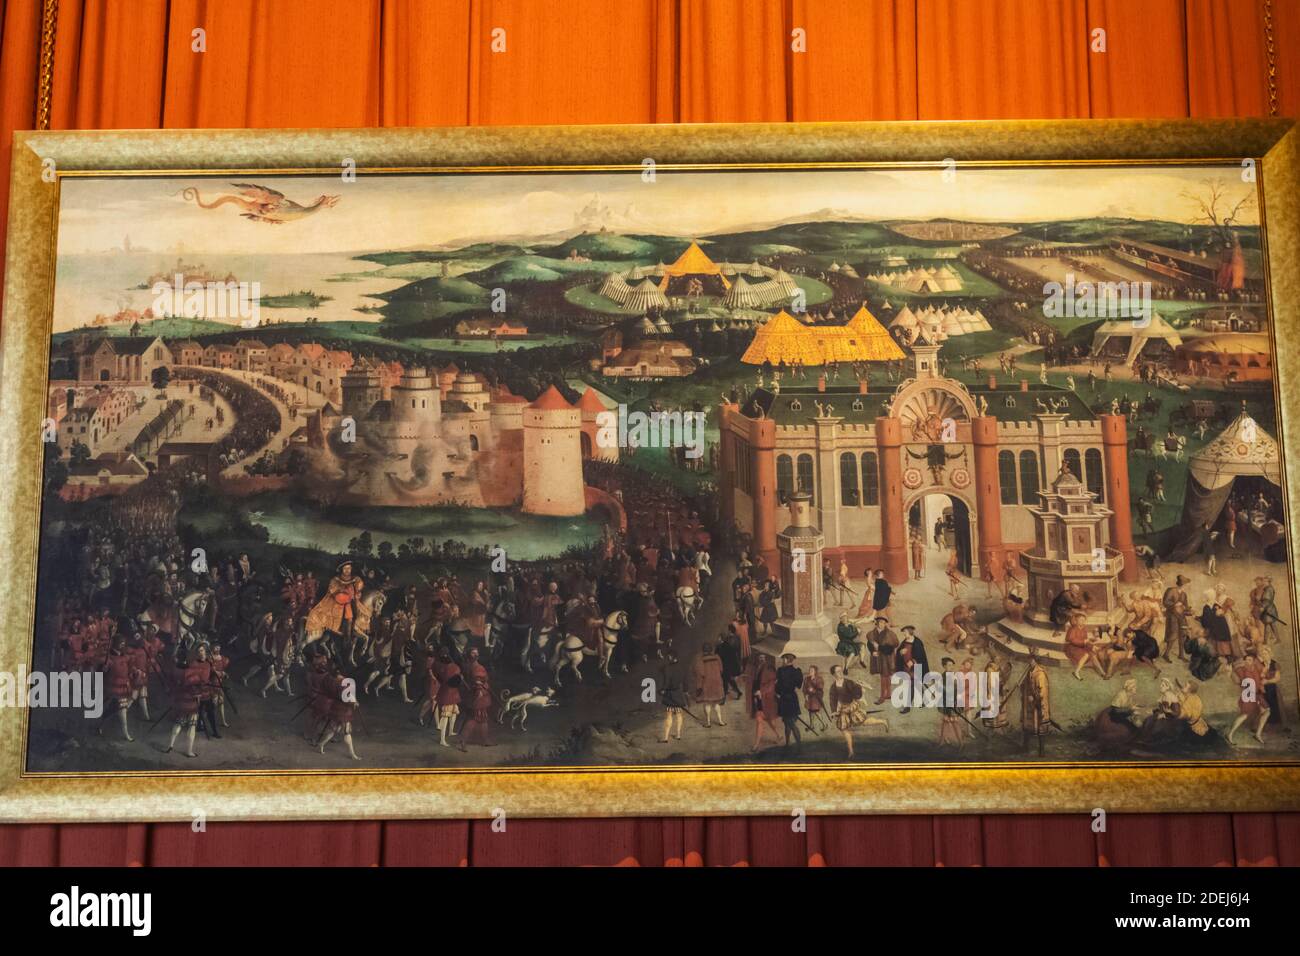 England, Kent, Leeds Castle, Painting of The Field of Cloth of Gold showing The Summit Meeting Between Henry VIII and Francis I of France in Ballinghe Stock Photo